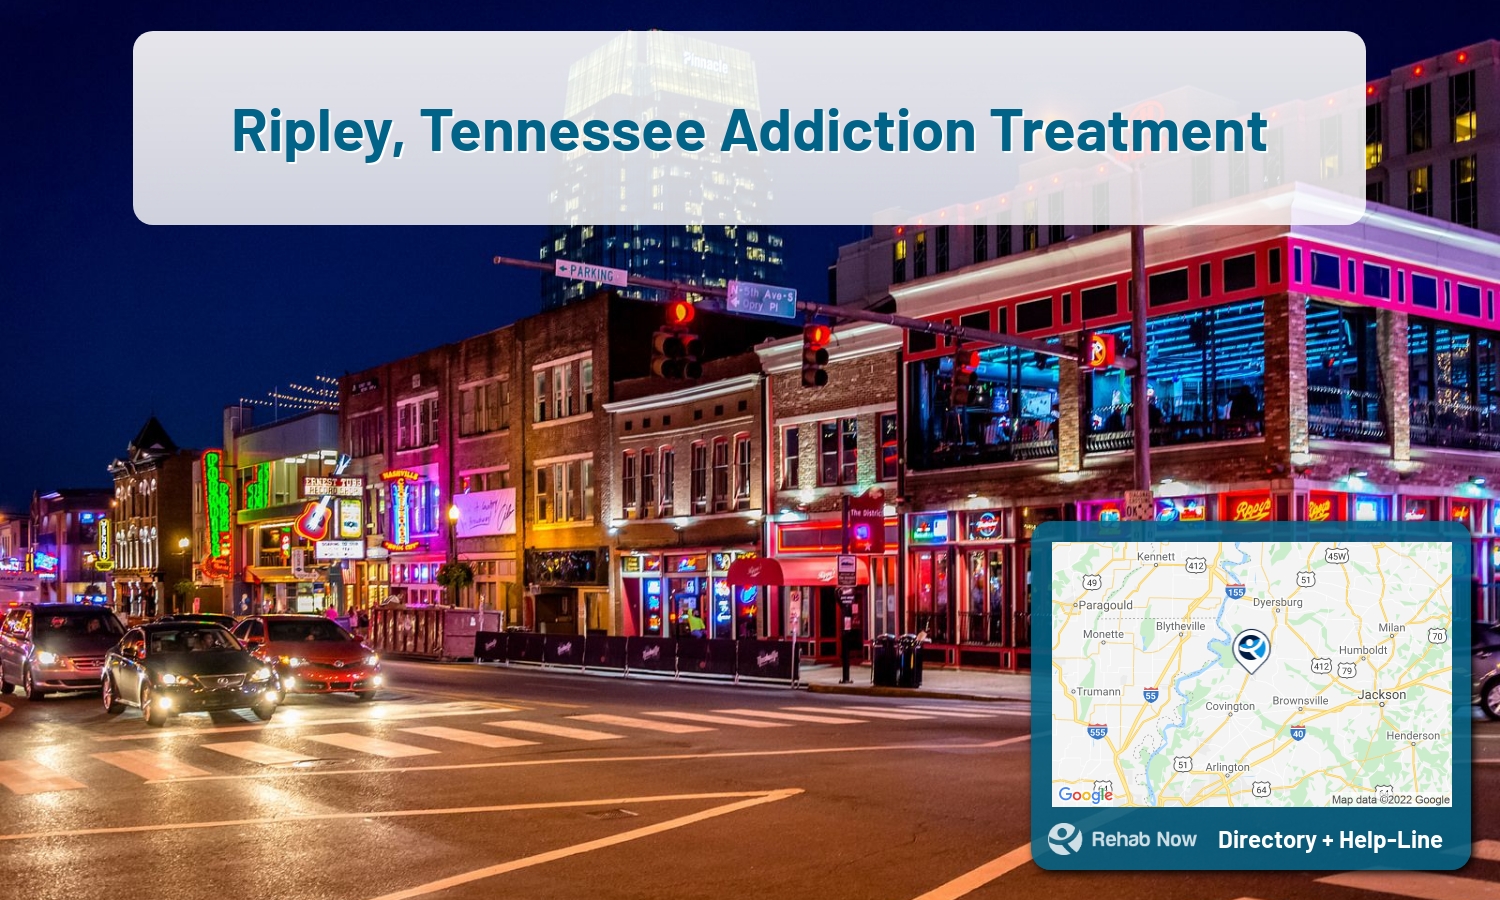 List of alcohol and drug treatment centers near you in Ripley, Tennessee. Research certifications, programs, methods, pricing, and more.